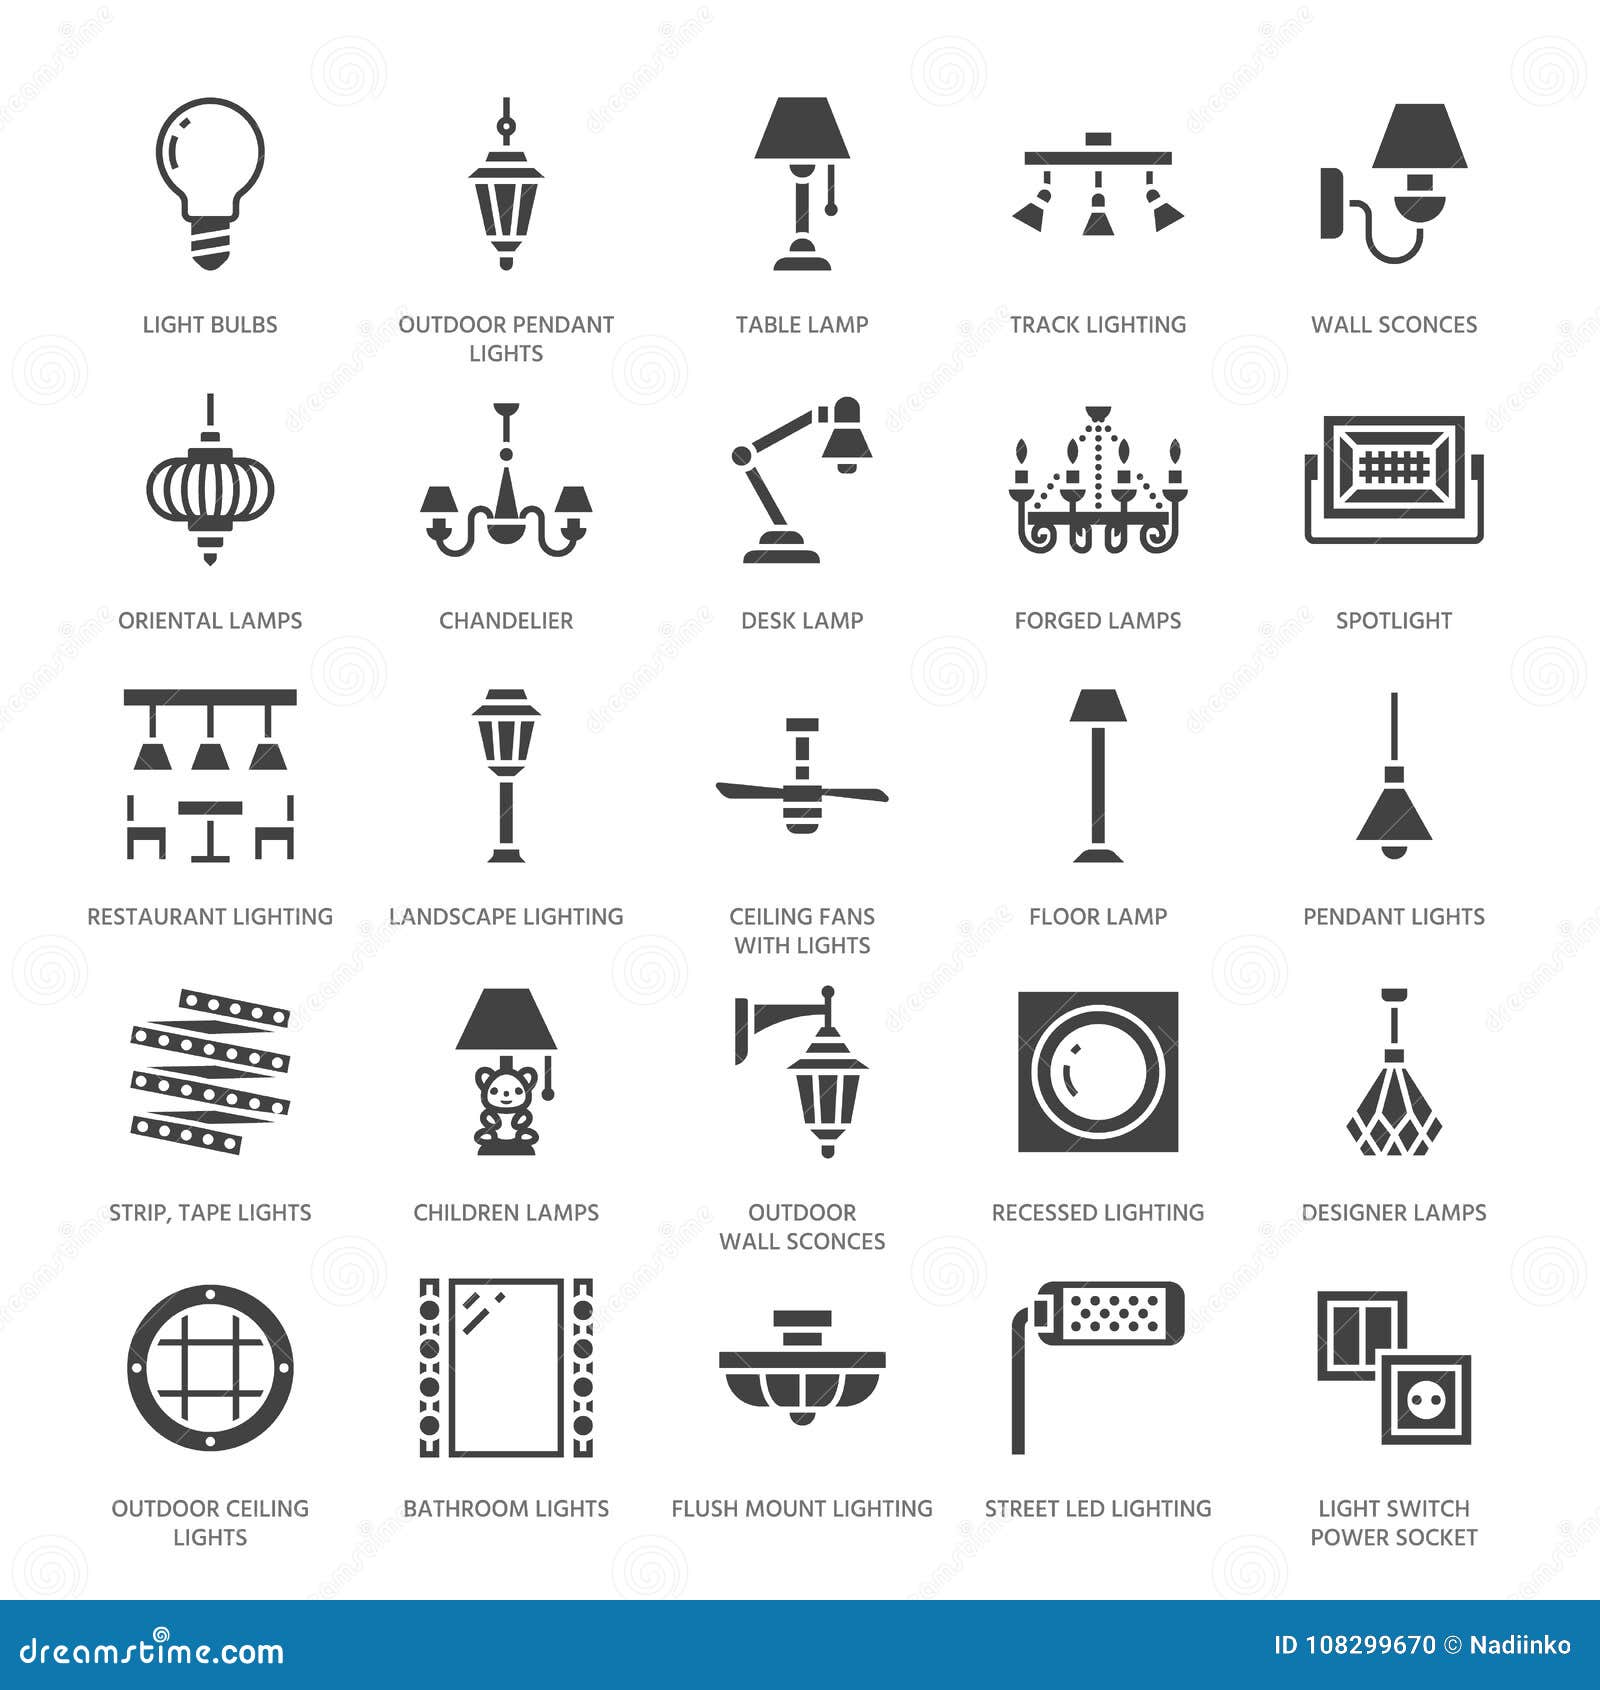 light fixture, lamps flat glyph icons. home and outdoor lighting equipment - chandelier, wall sconce, bulb, power socket